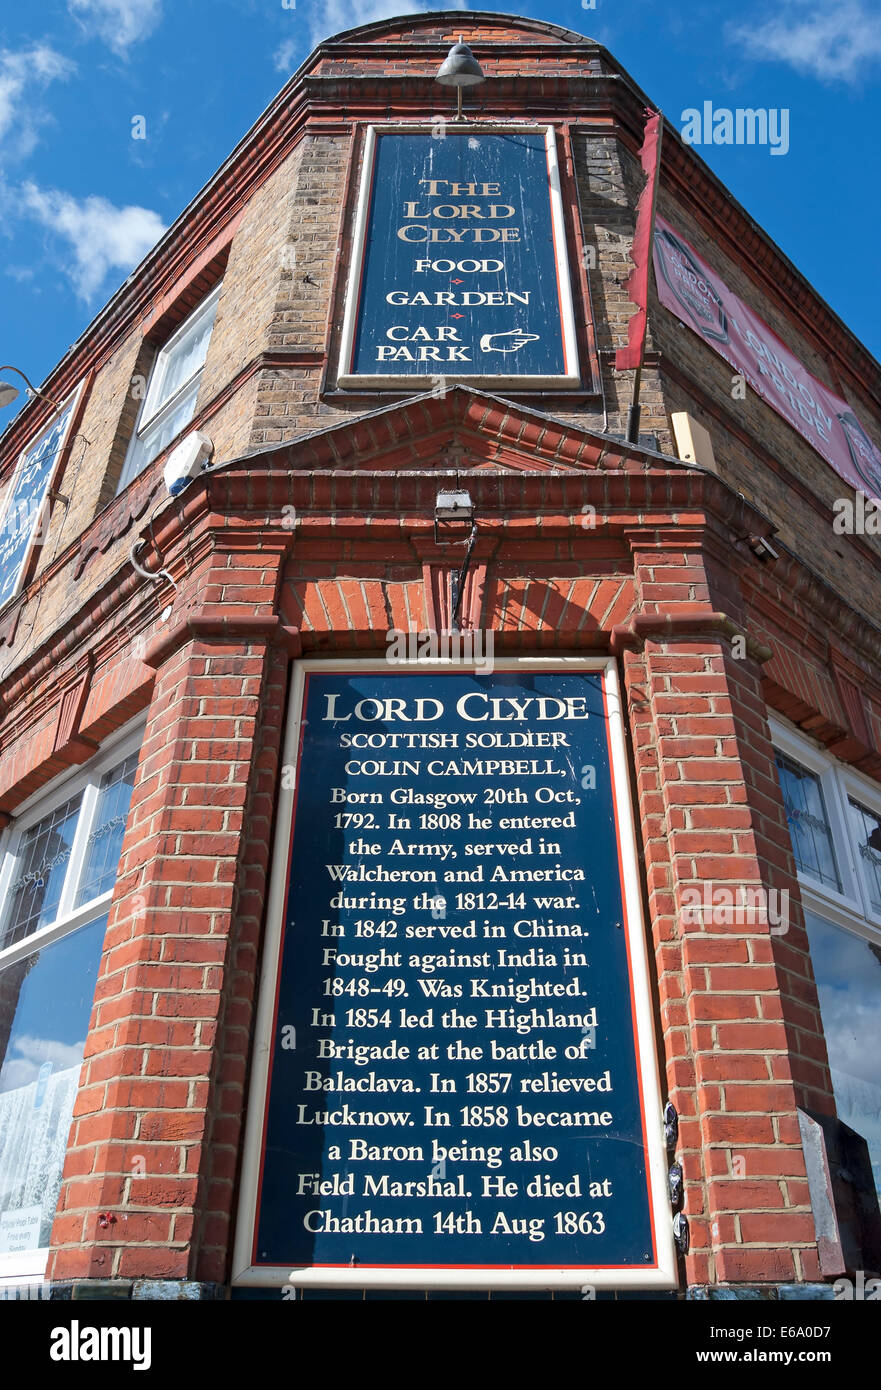 exterior of the lord clyde pub, with noticeboard describing the life of the 19th century british army officer, hounslow, england Stock Photo